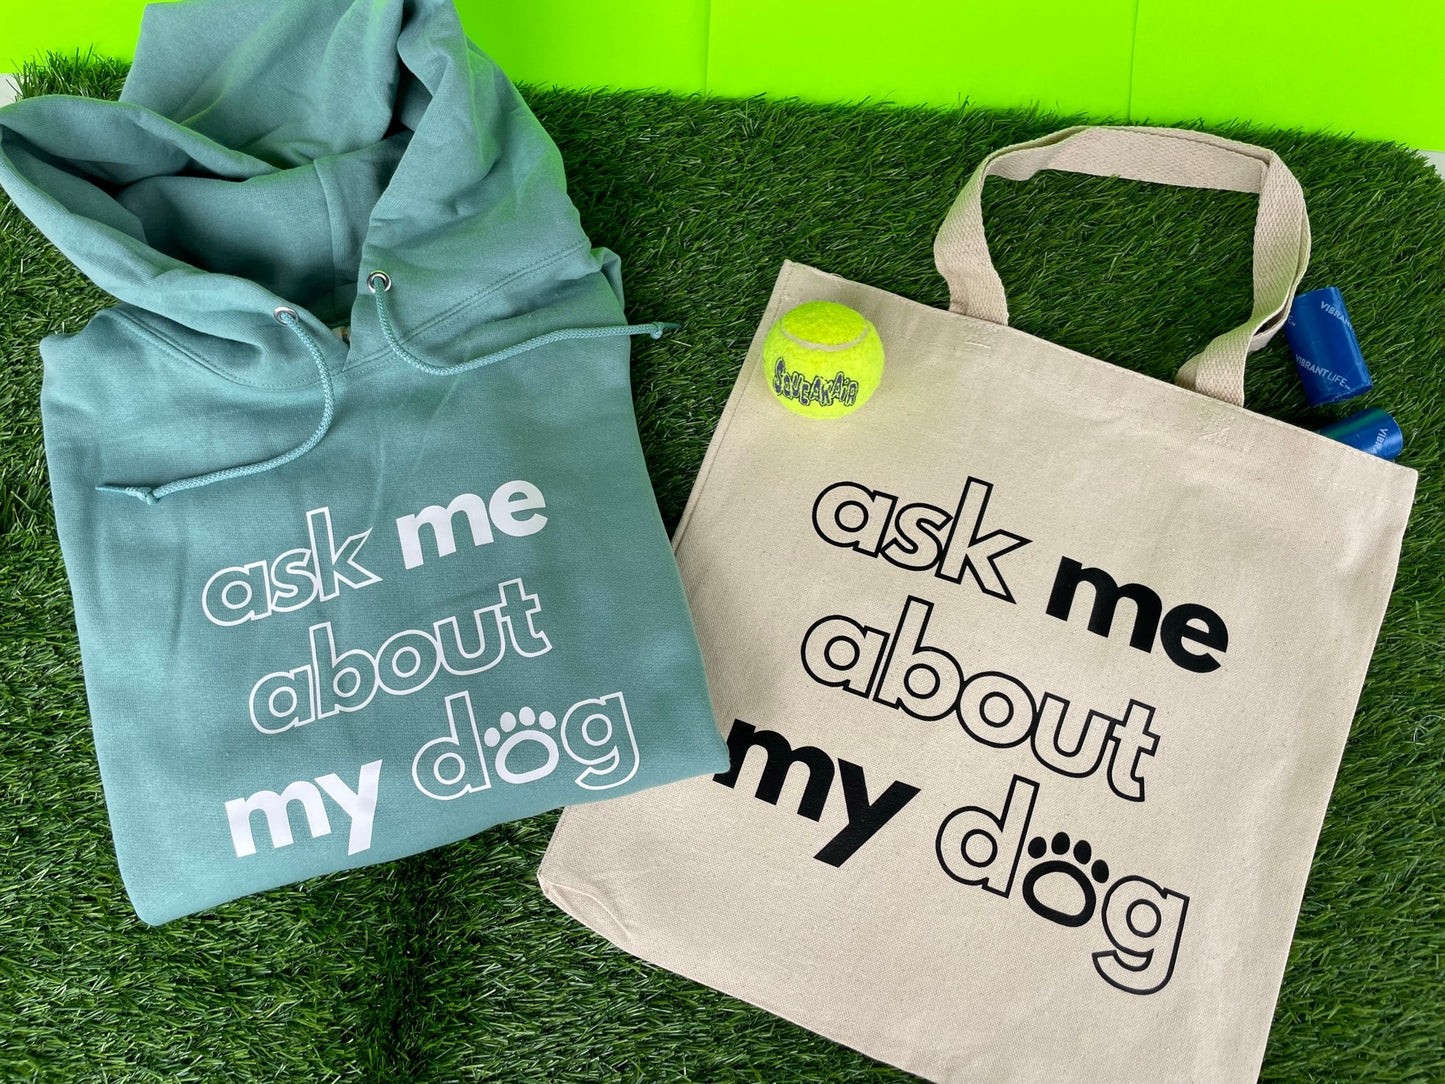 ASK ME ABOUT MY DOG TOTE